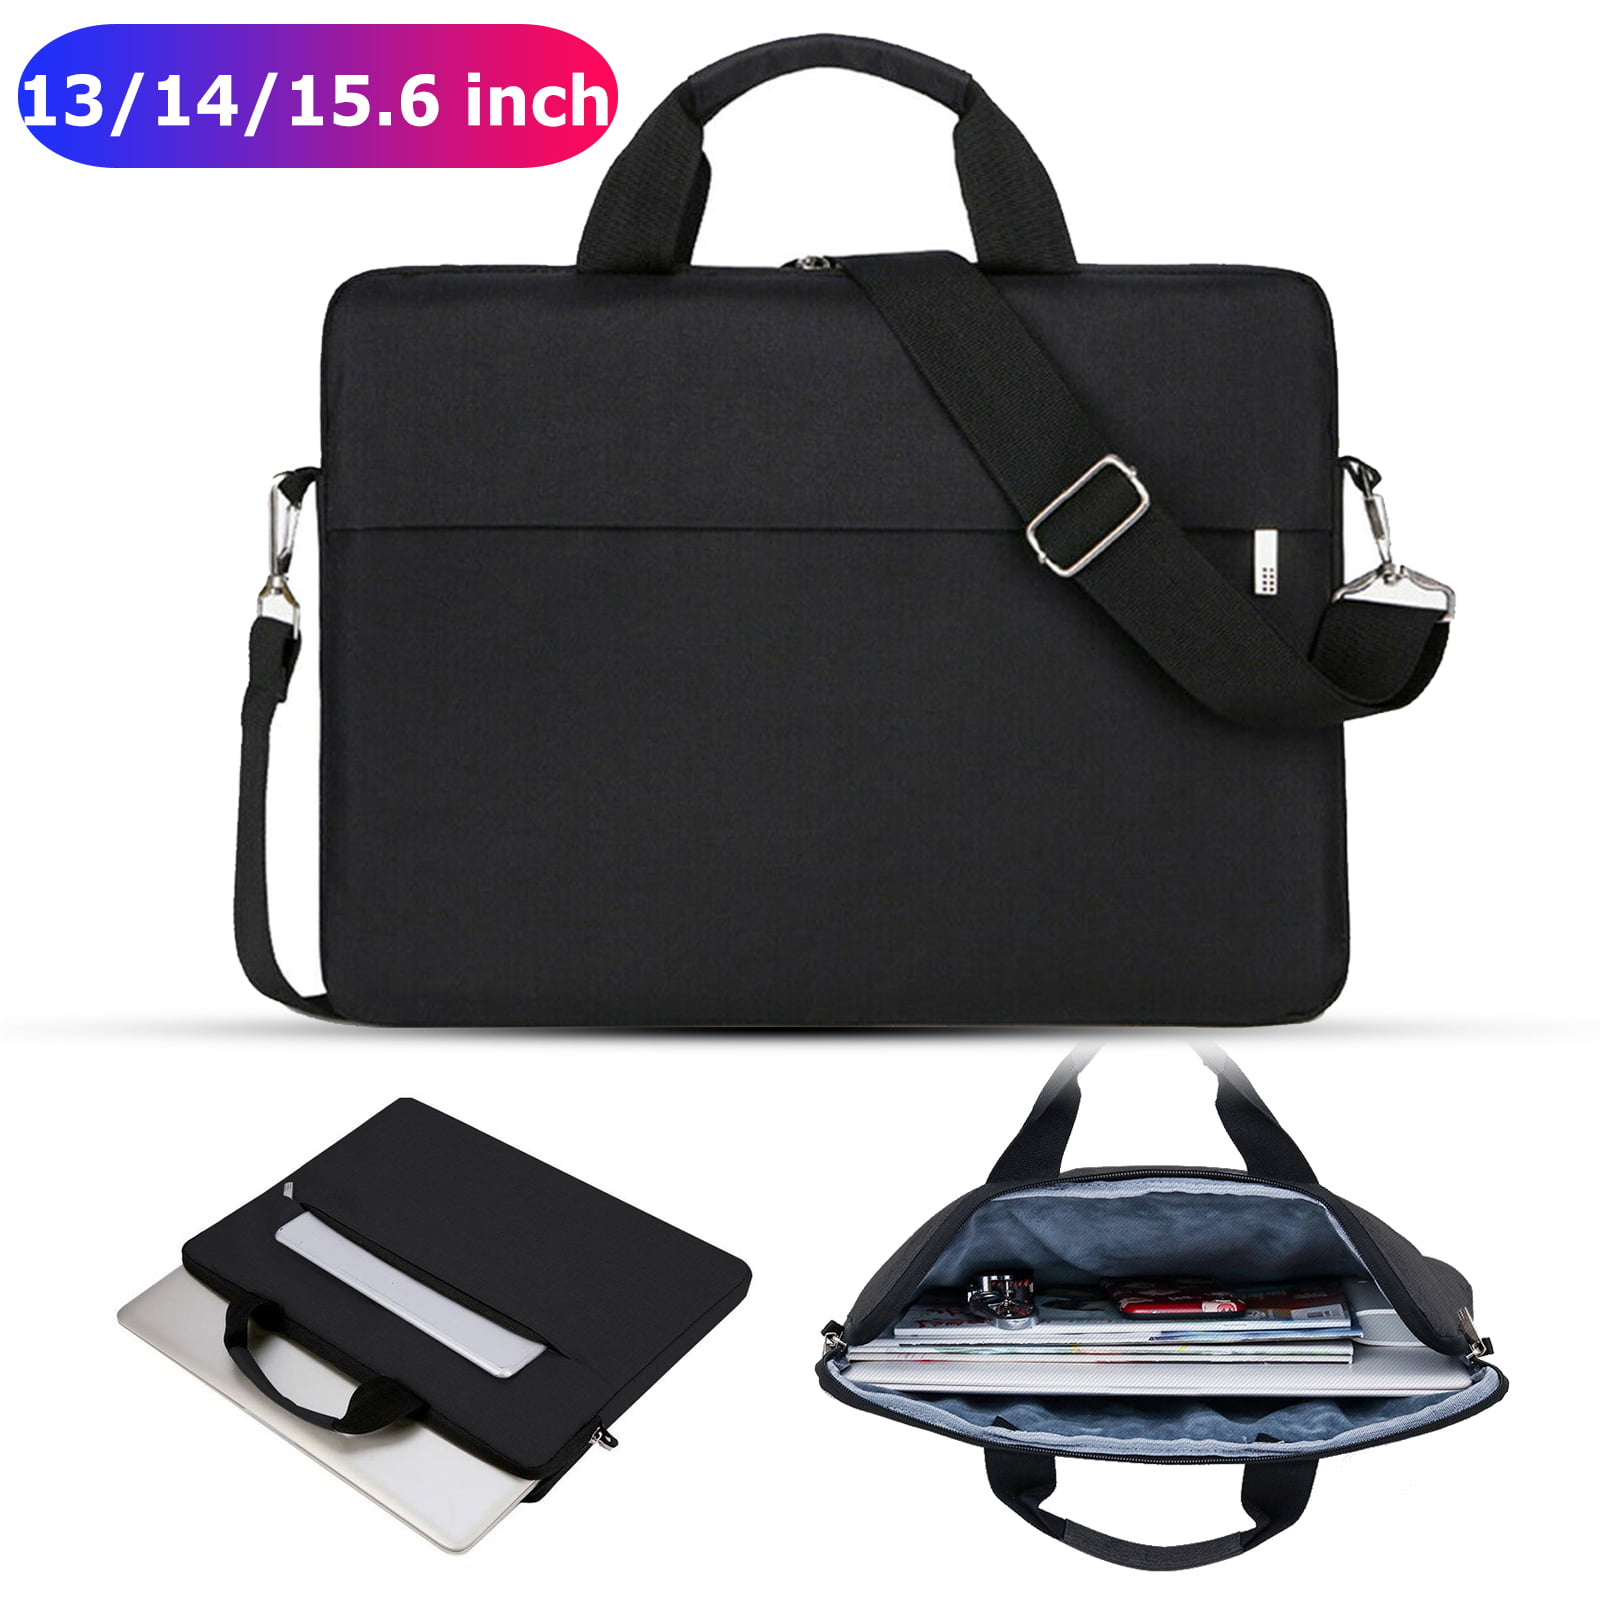 School Laptop Shoulder Bag Compatible 13-15.6 Inches Office or Business Travel for Outdoor Ultra-Thin Laptop Bag Cake Dessert Laptop Handbag with Handles